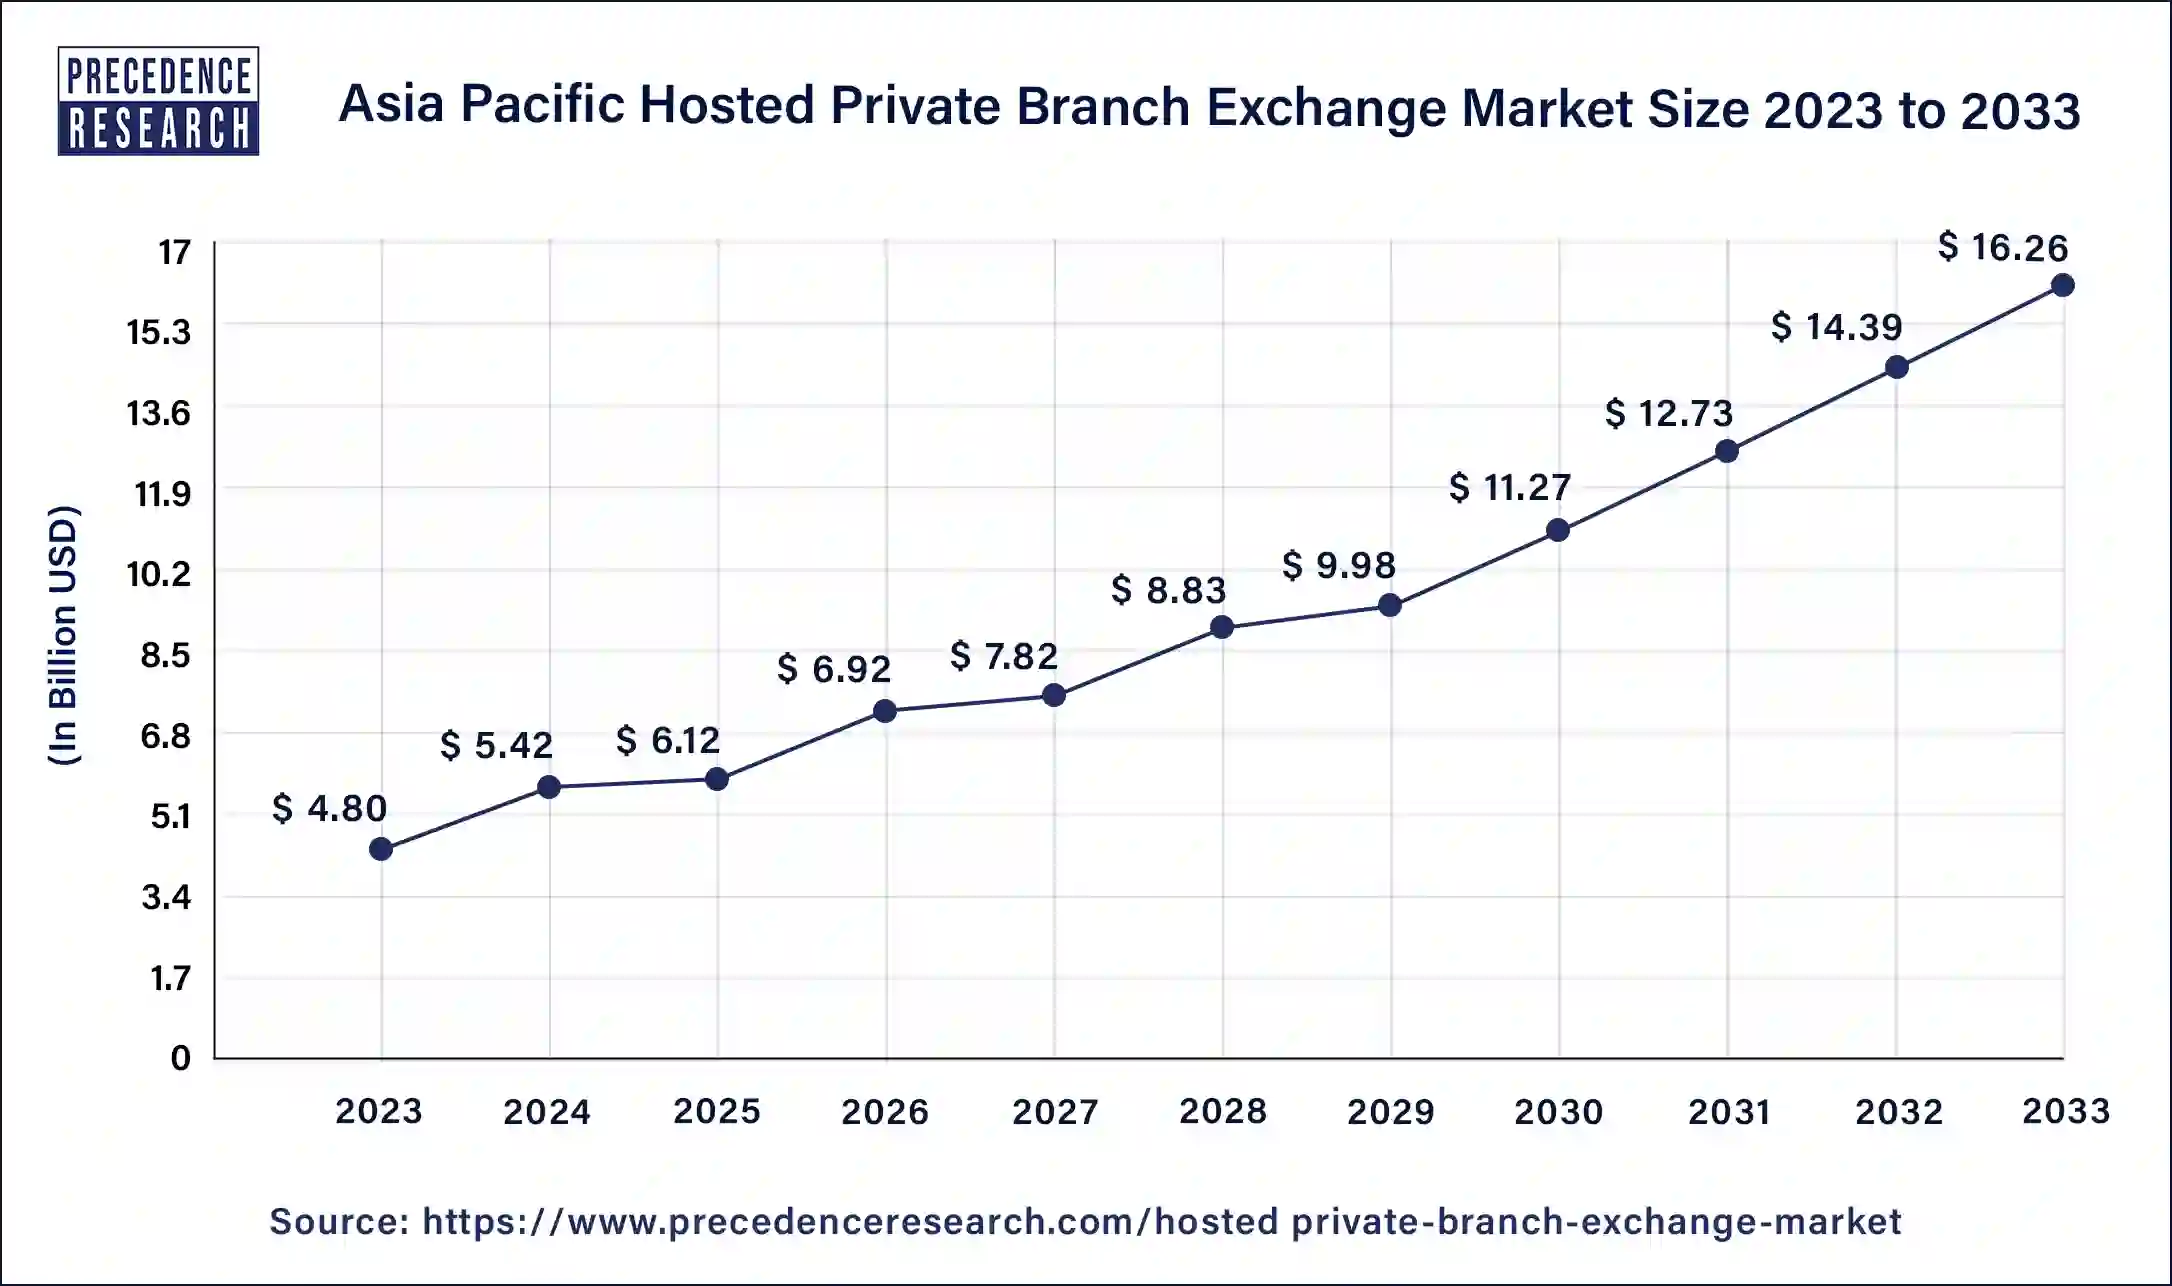 Asia Pacific Hosted Private Branch Exchange Market Size 2024 to 2033